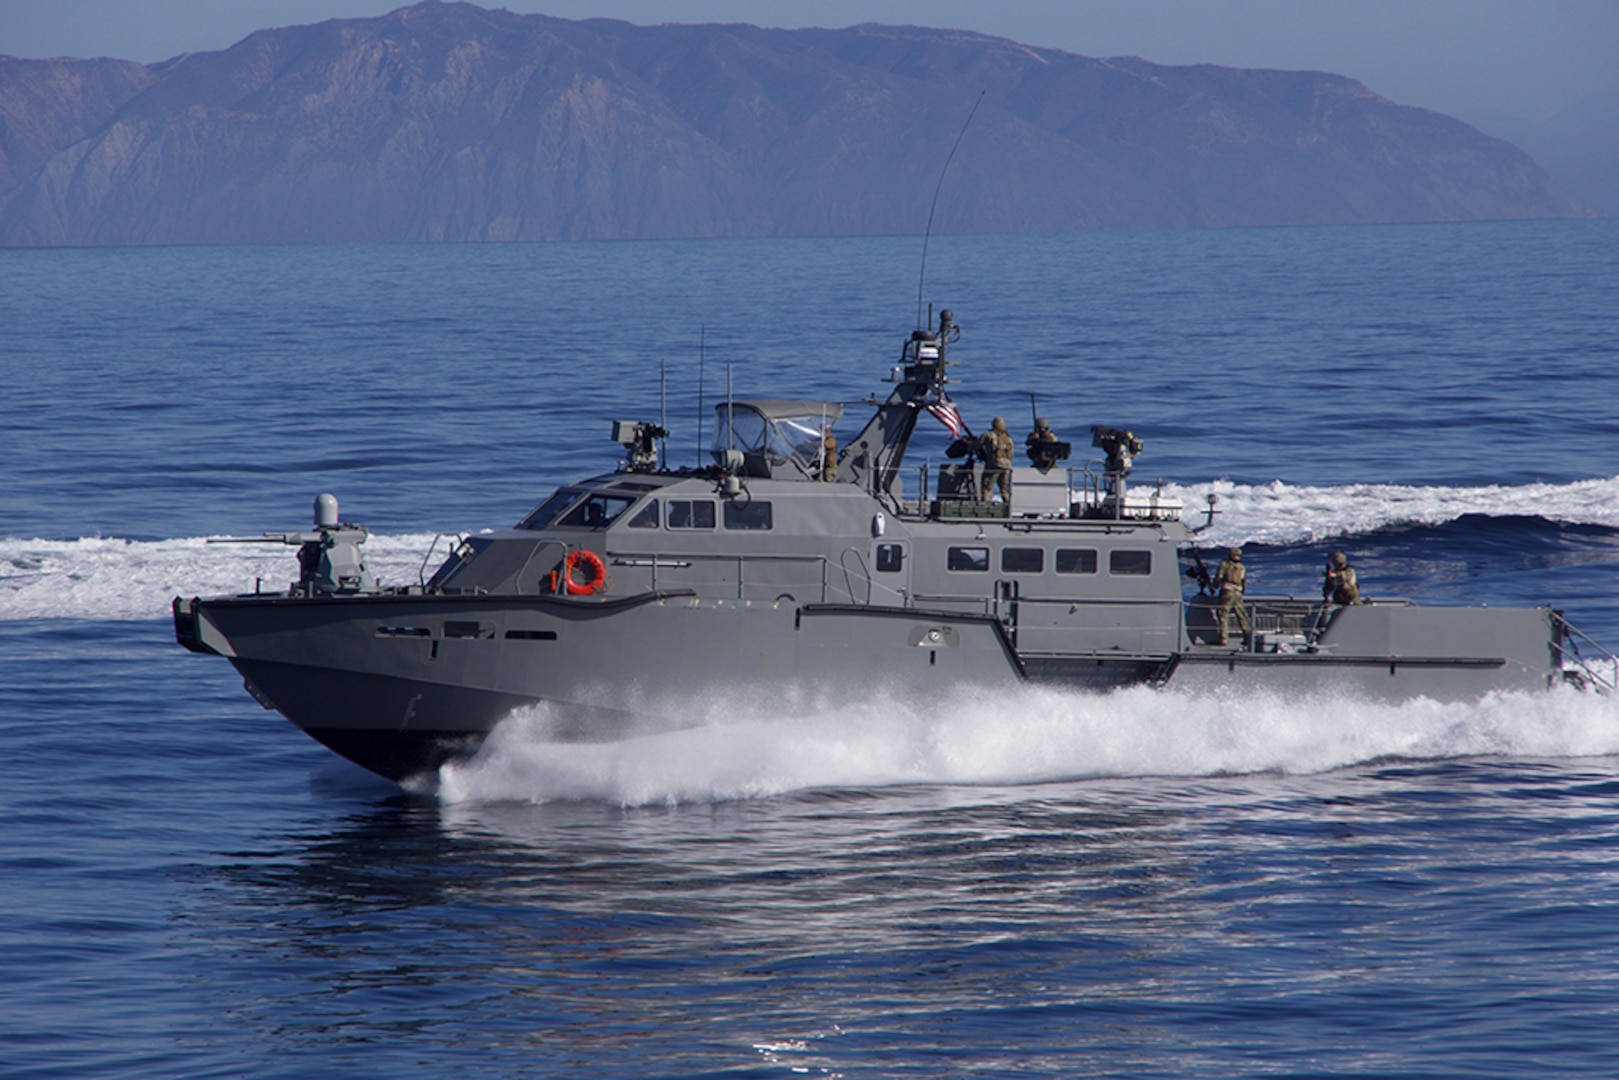 A U.S. Navy Mark VI patrol boat wards off a simulated attacker during show of force strait transit exercise involving aircraft carrier USS Carl Vinson and Carrier Strike Group 1, Nov. 4, 2016.  